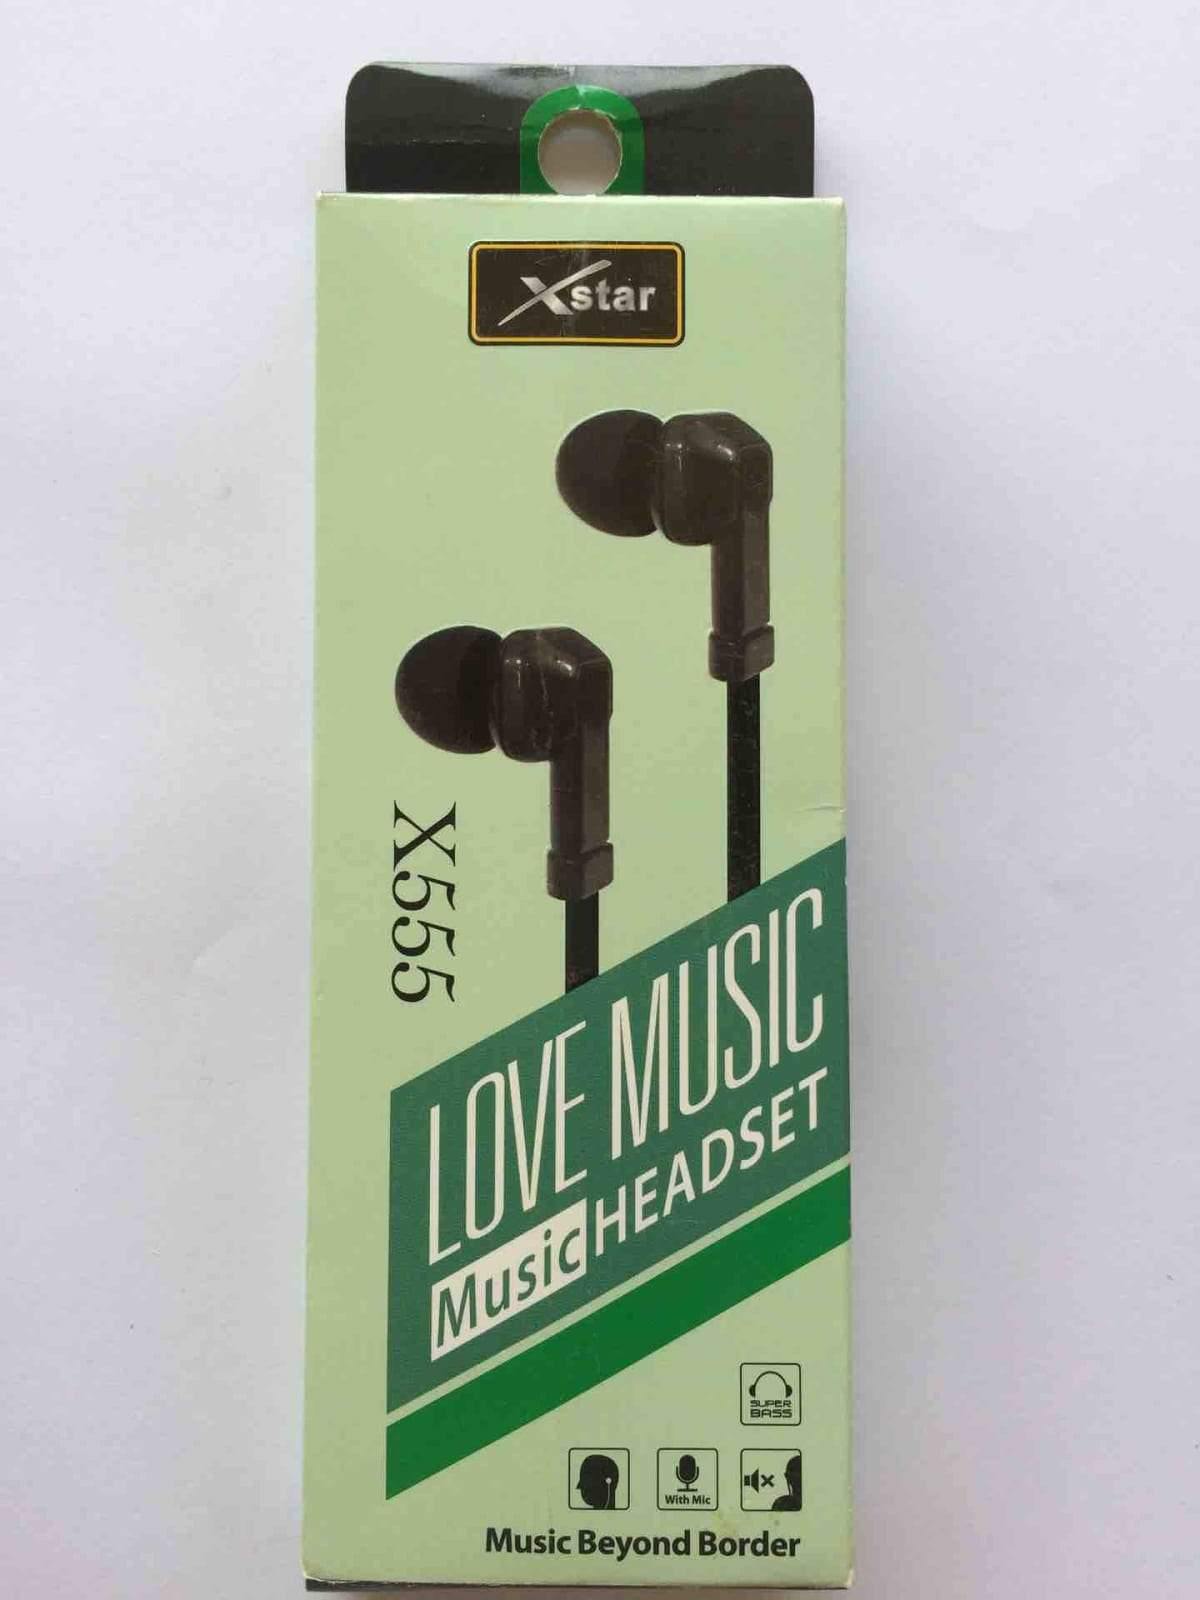 Xstar X-555 Ultra Bass Music Stereo Earphone with Mic Noise cancellation and remote-Earphone-dealsplant